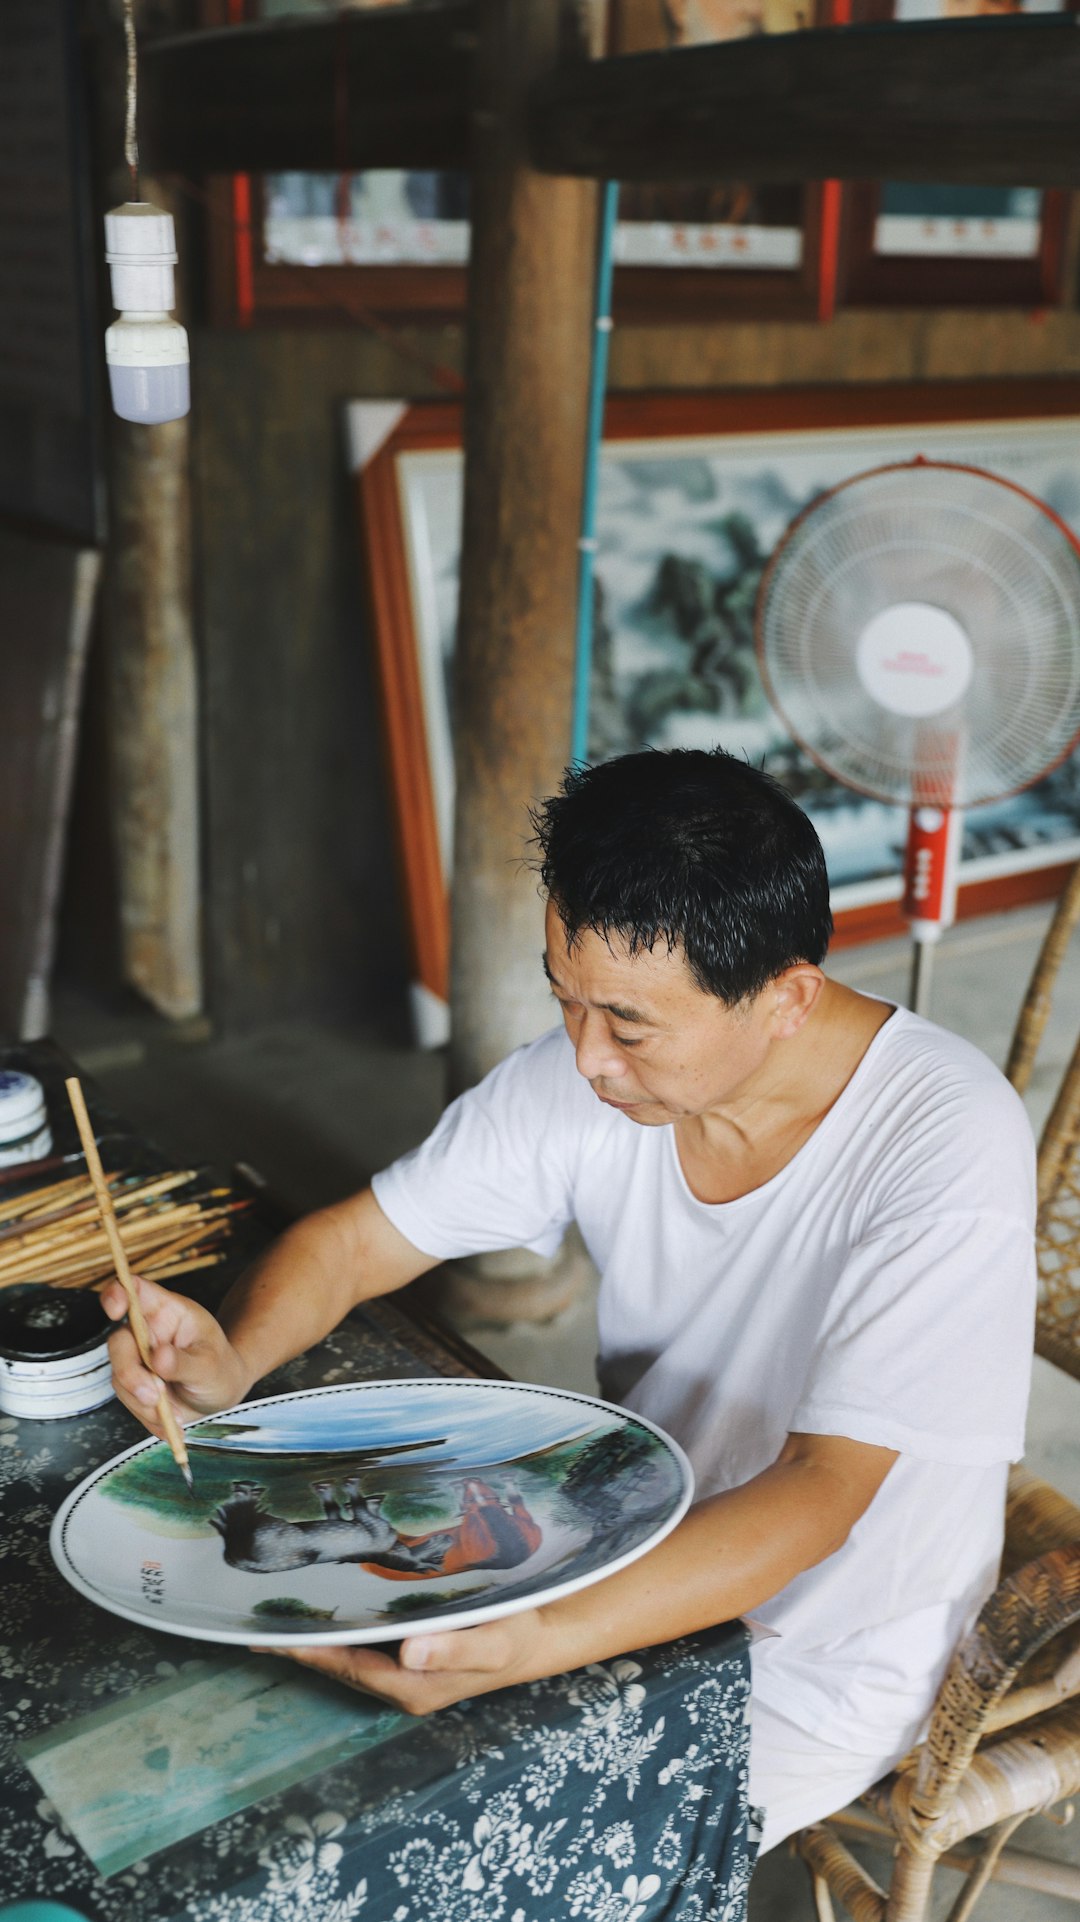 man sitting on chair while painting on plate